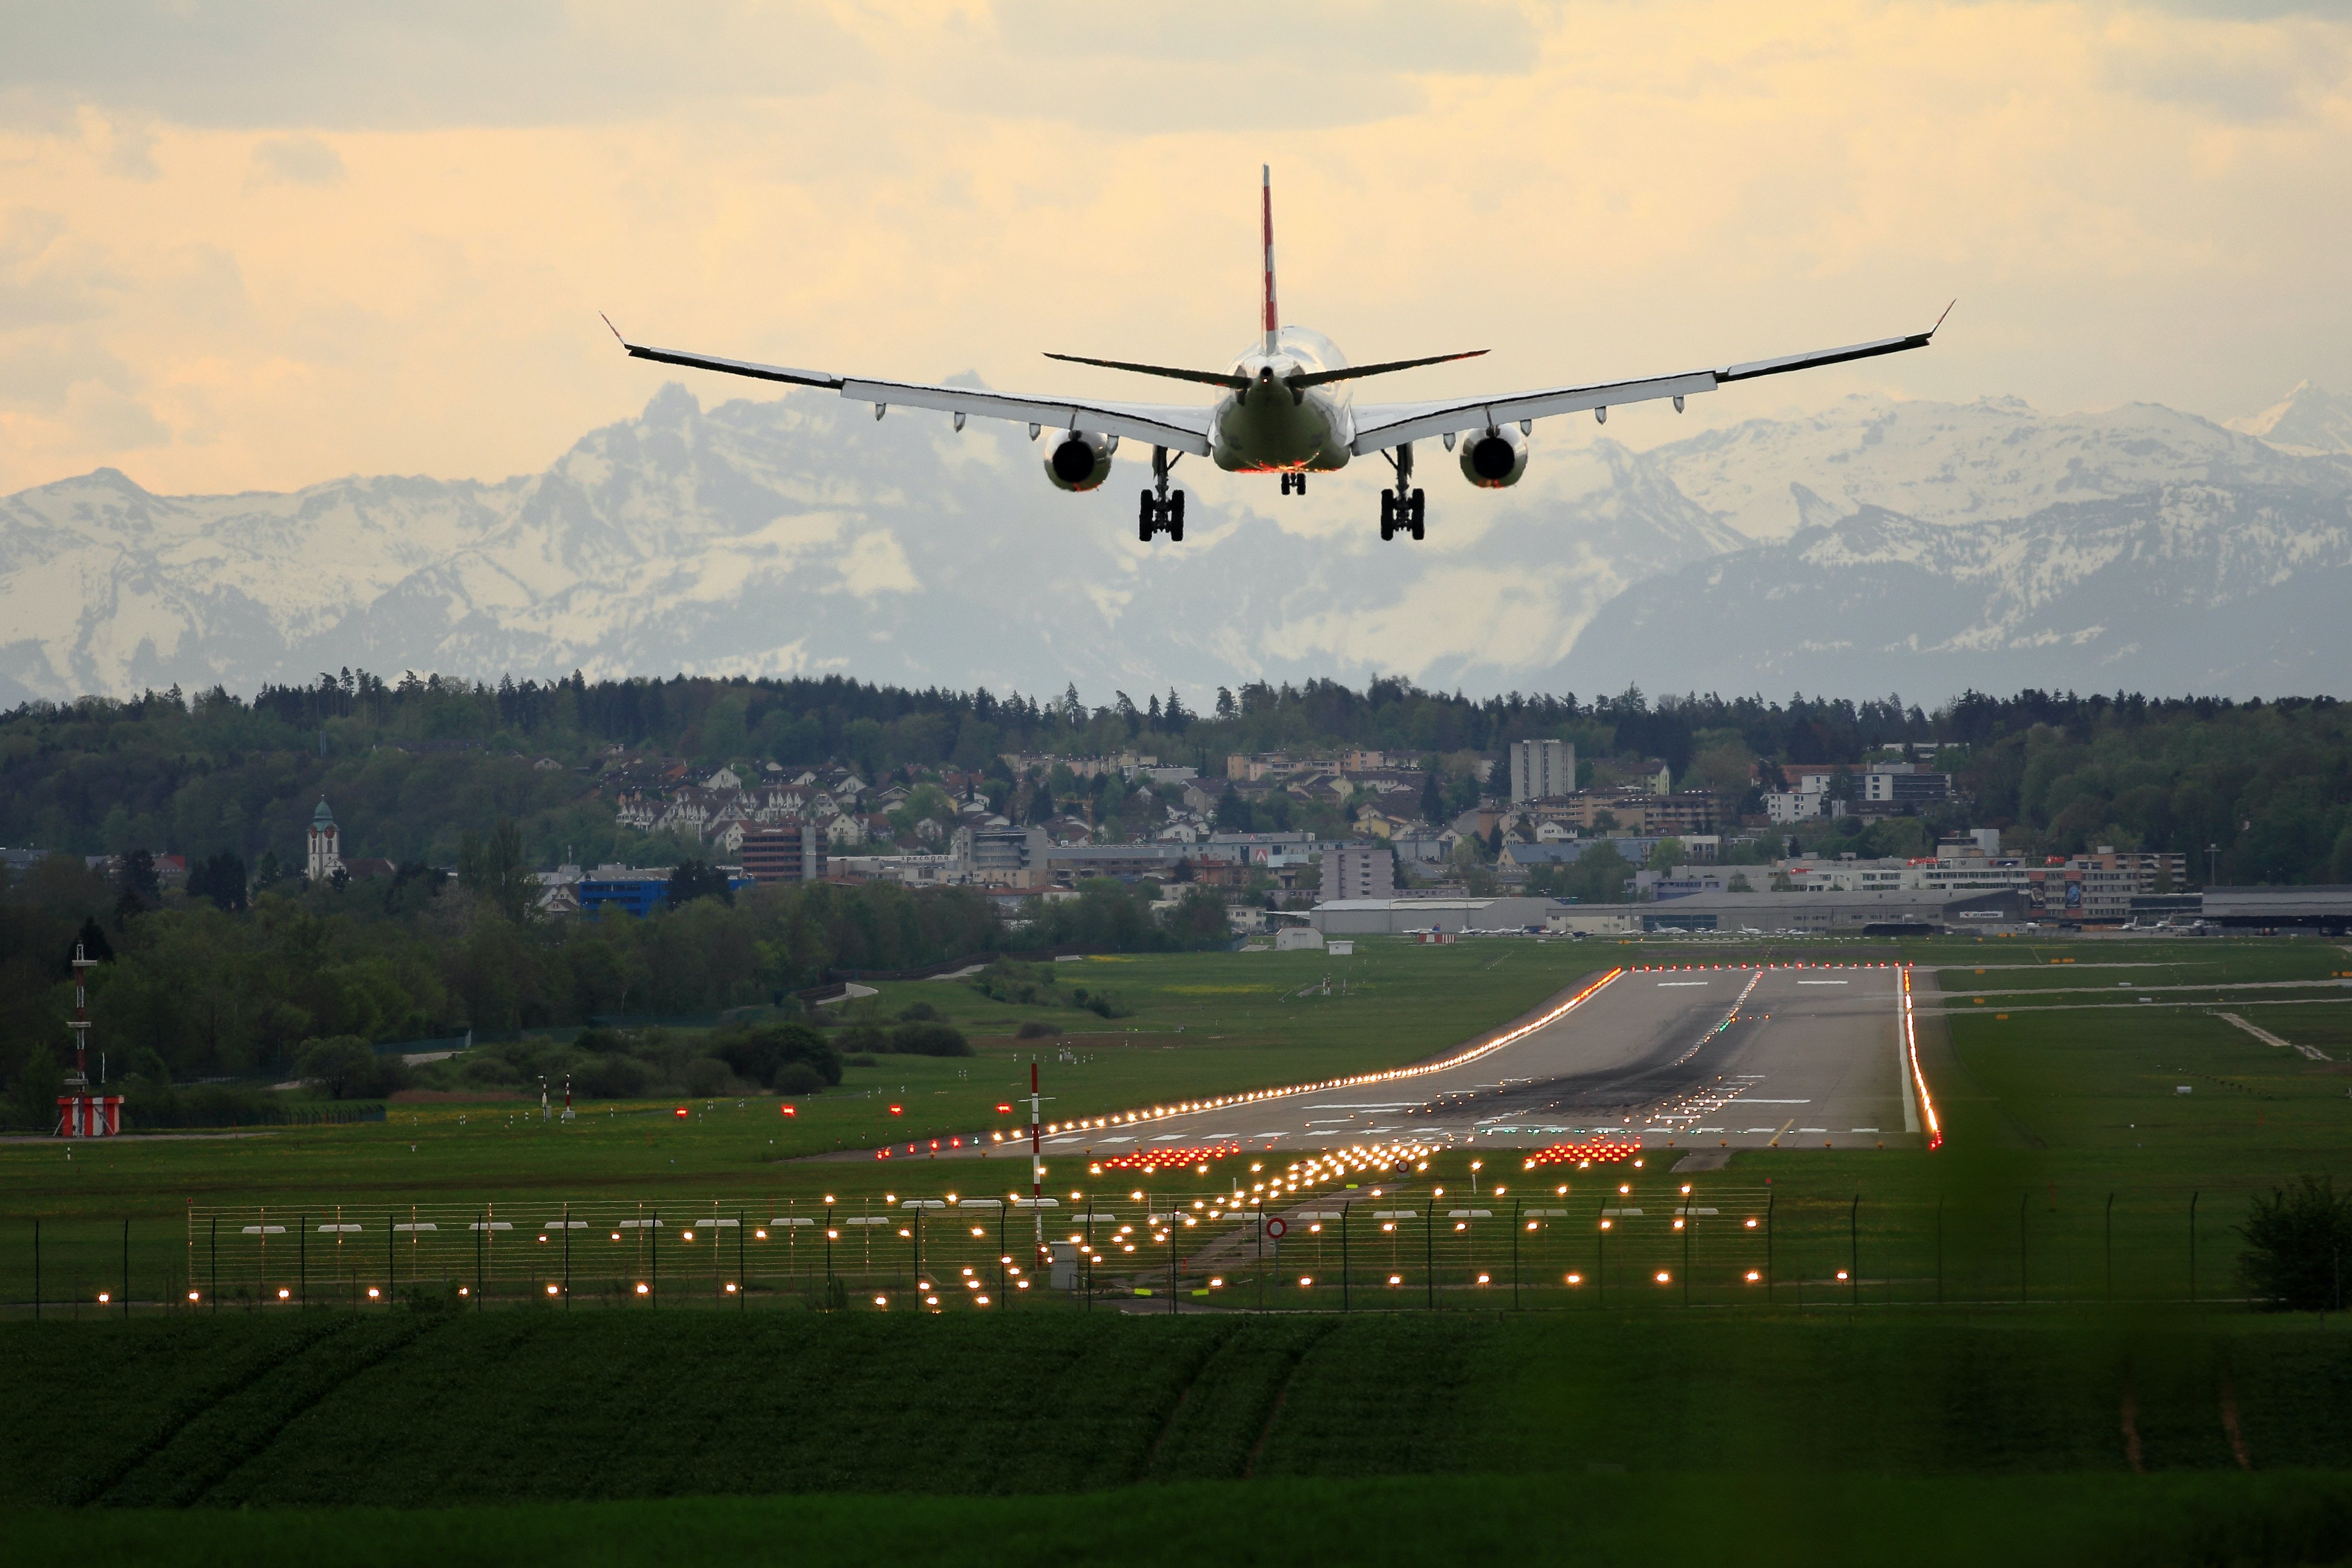 Image of an airplane coming in for a landing over a grassy landing strip with mountains in the background